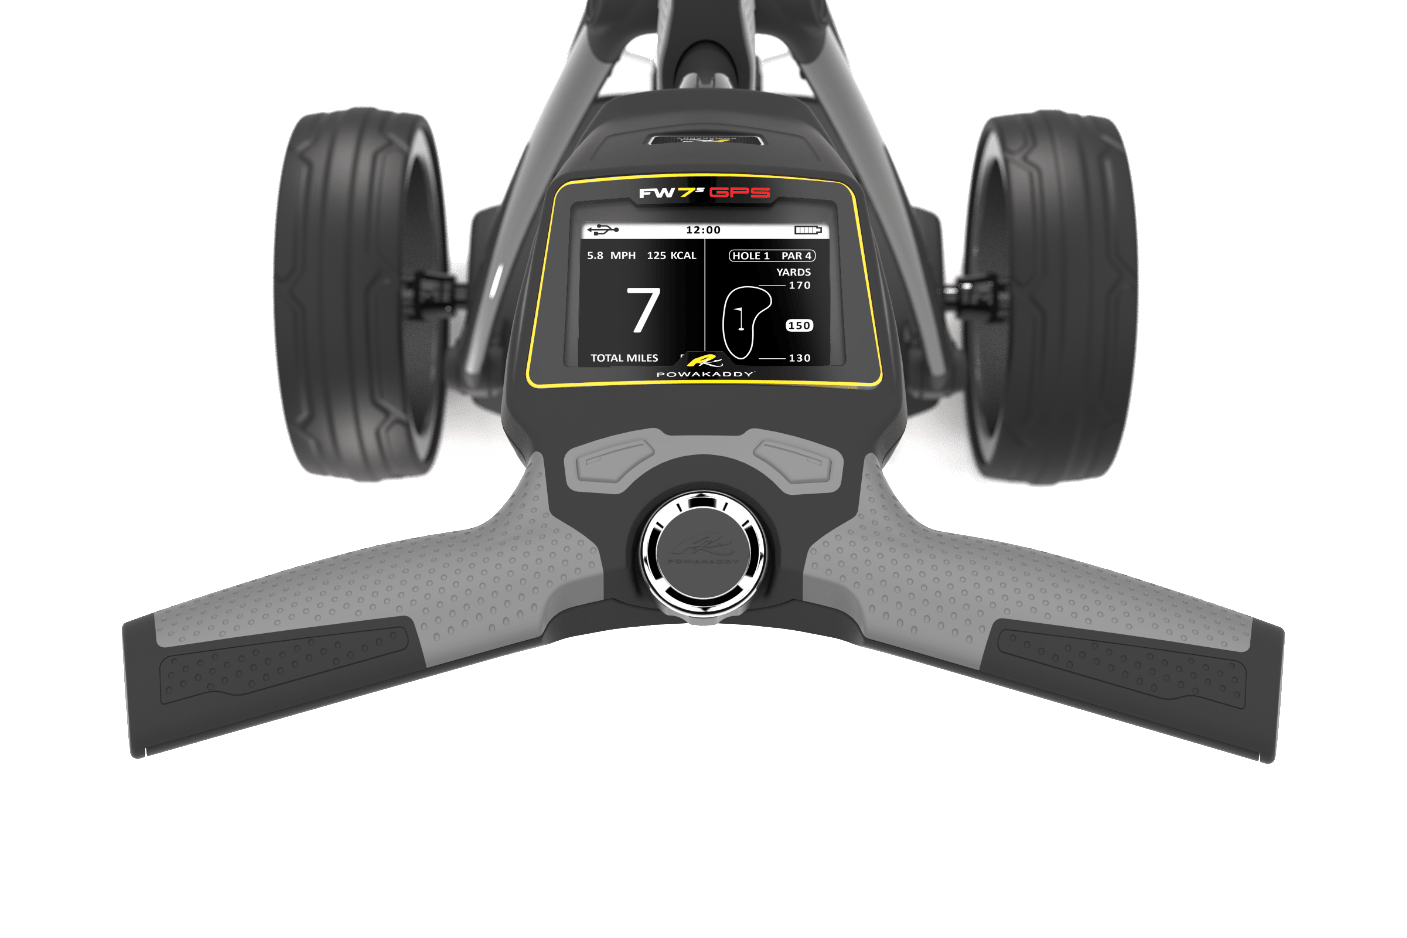 First look: Powakaddy launch FW7s with fully-integrated GPS